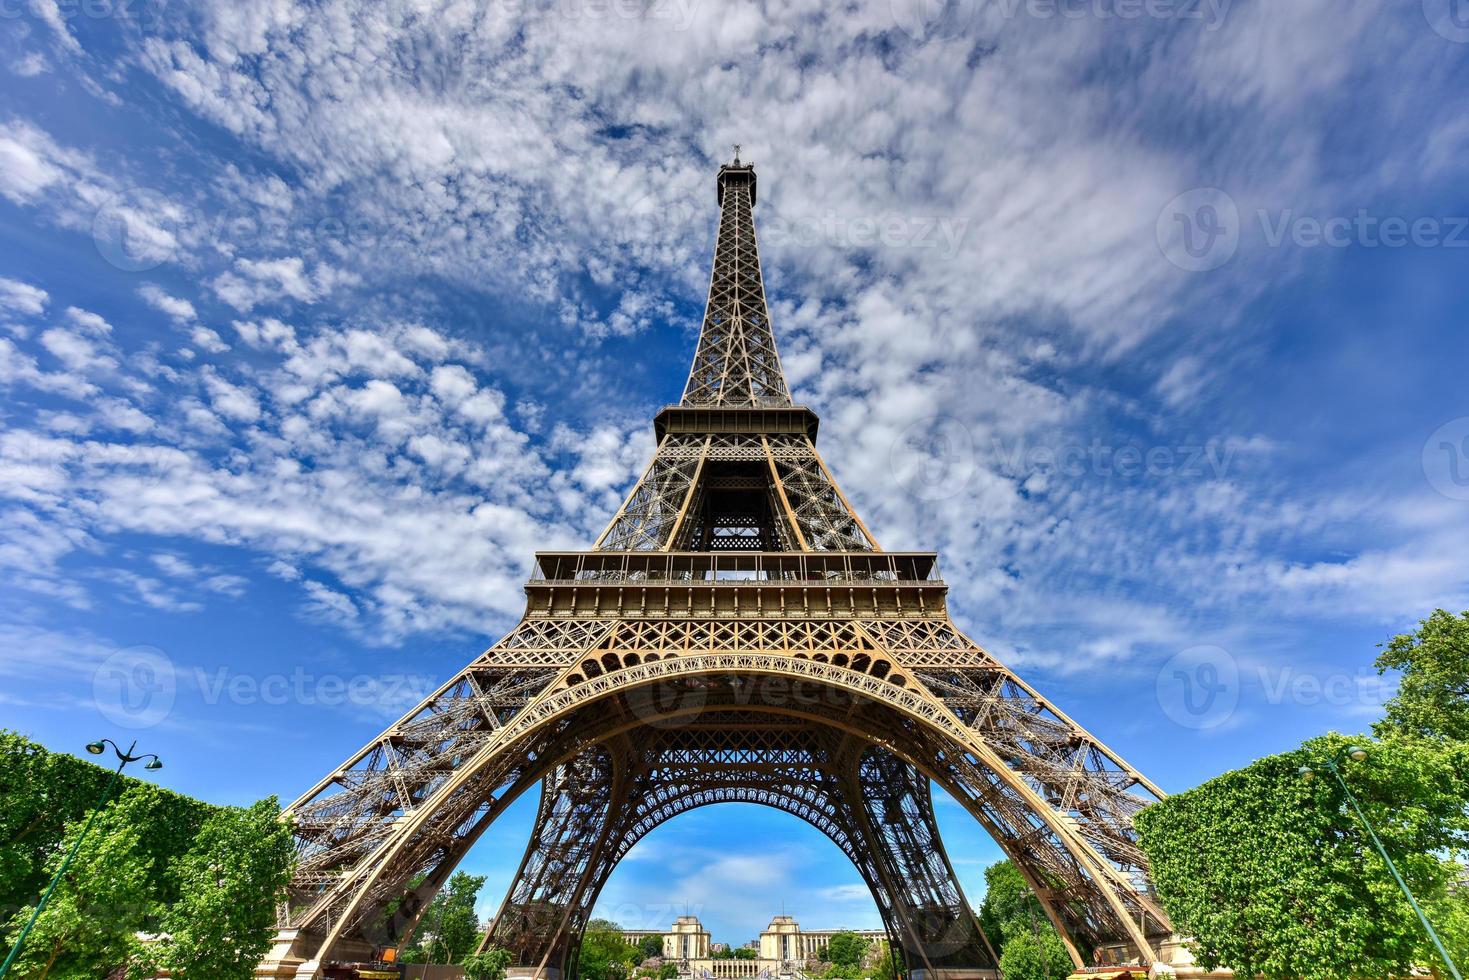 The iconic Eiffel Tower in Paris, France. photo